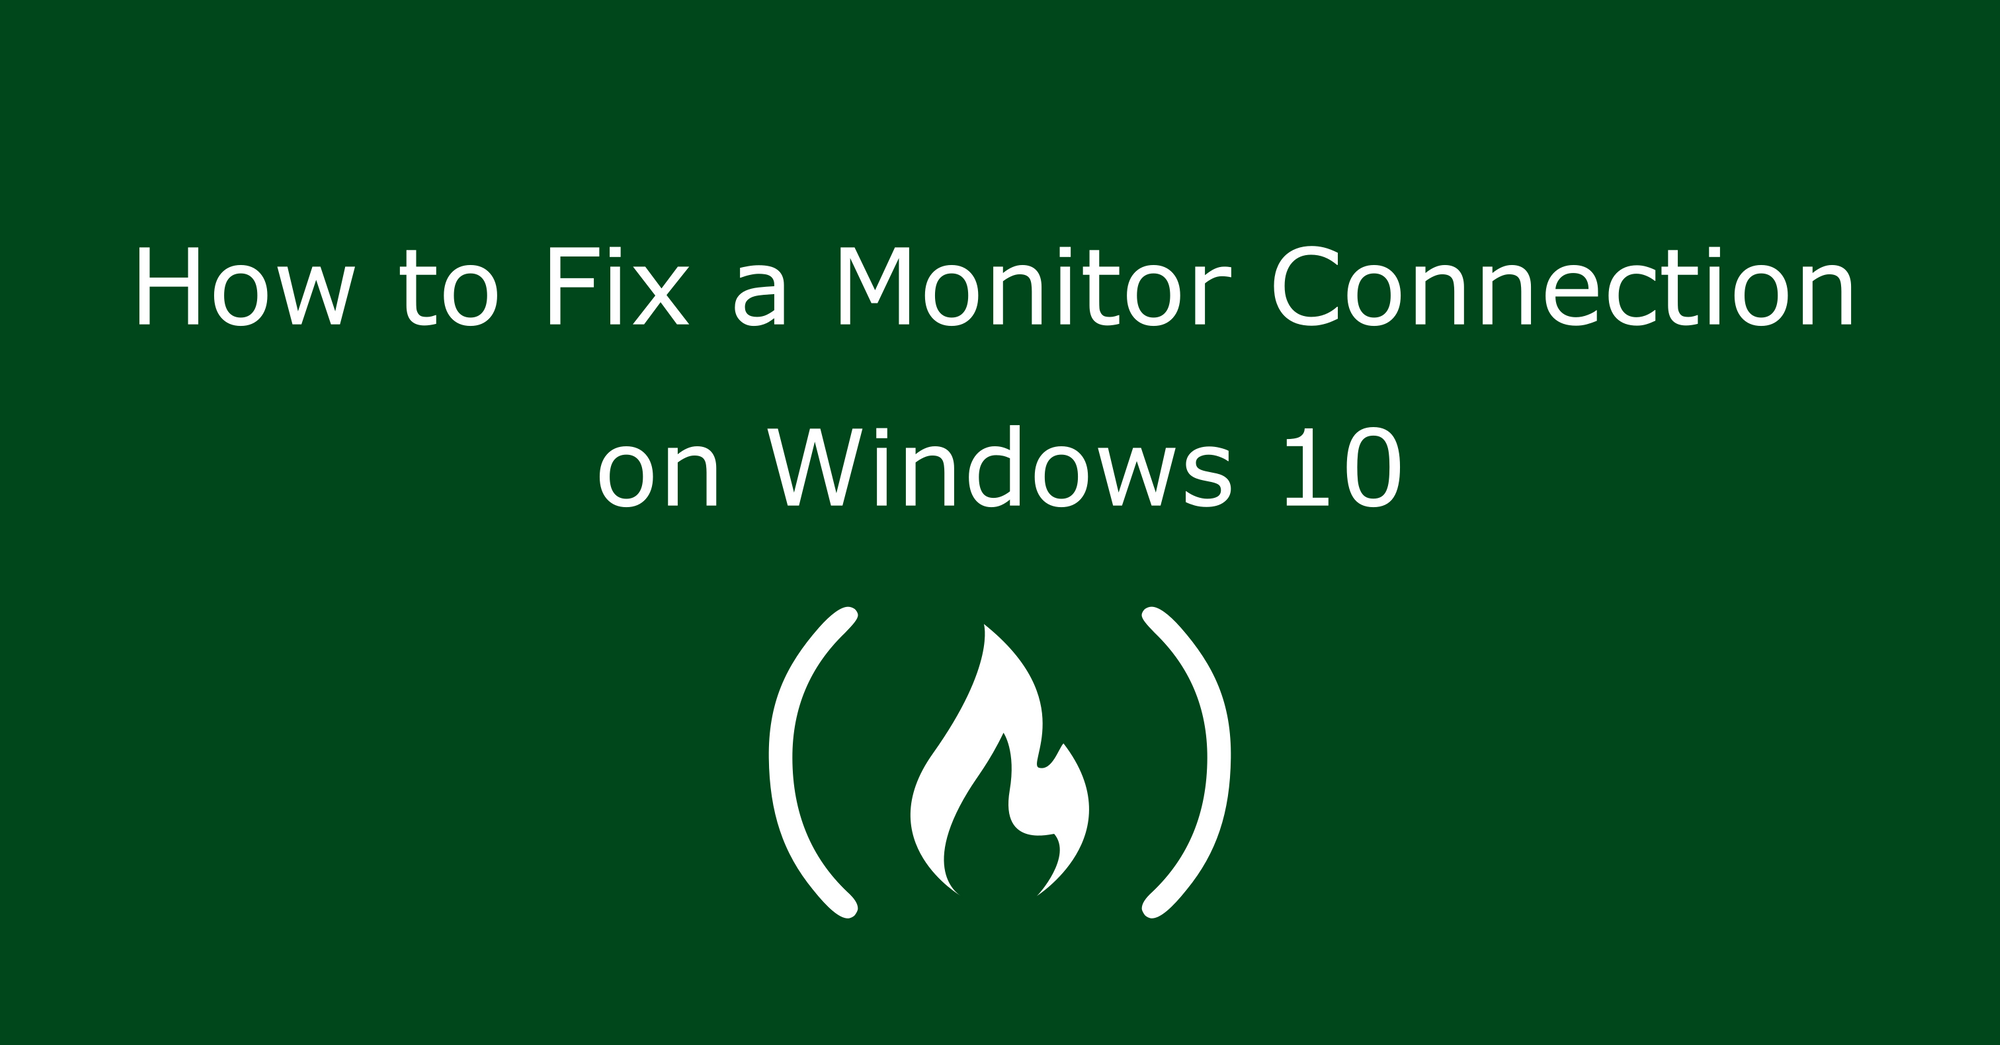 VGA No Signal – How to Fix a Monitor Connection on Windows 10 PC